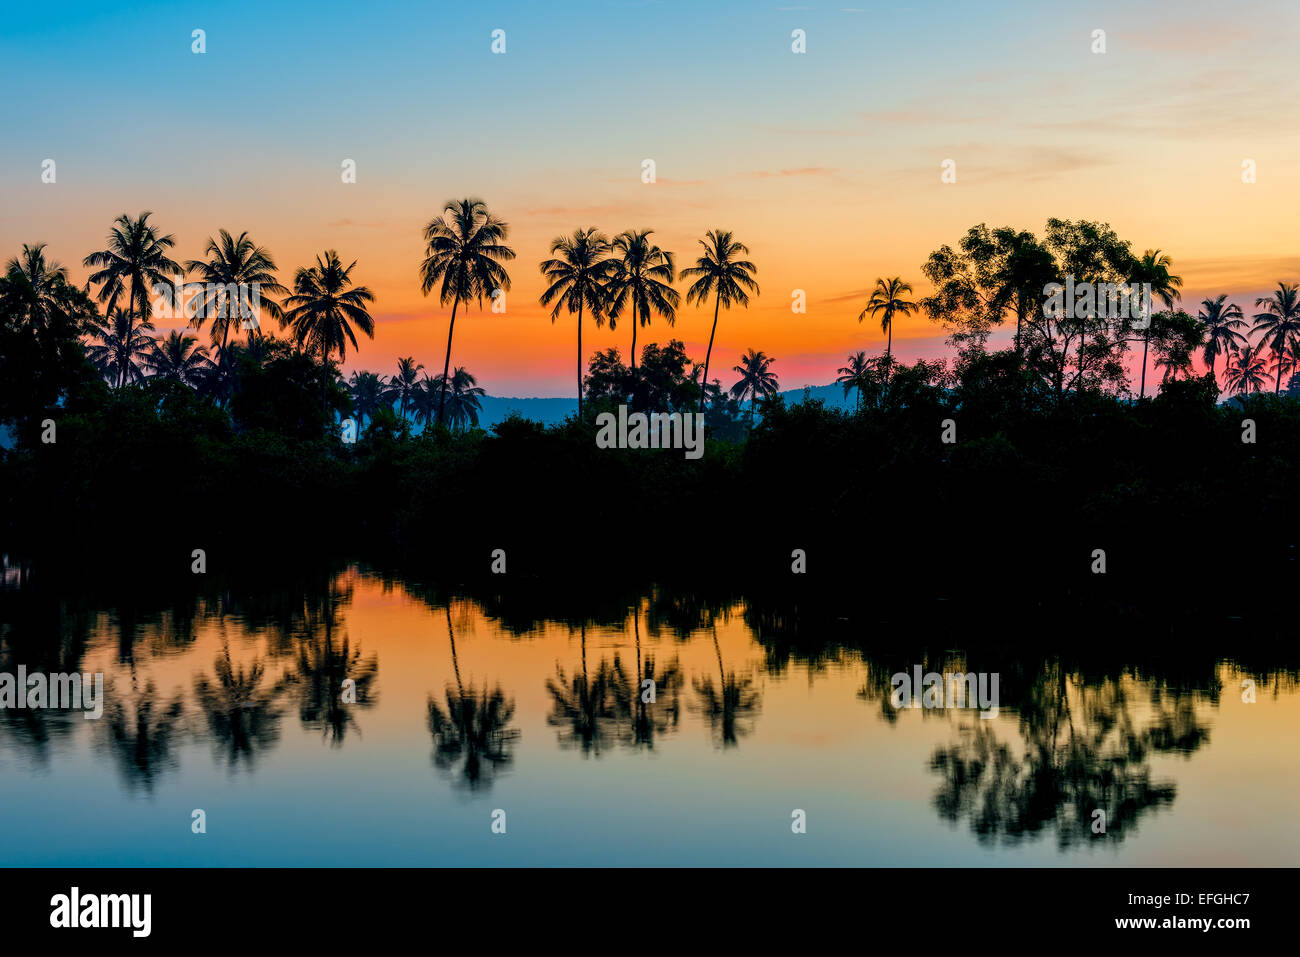 silhouettes of palm trees at dawn near a lake Stock Photo